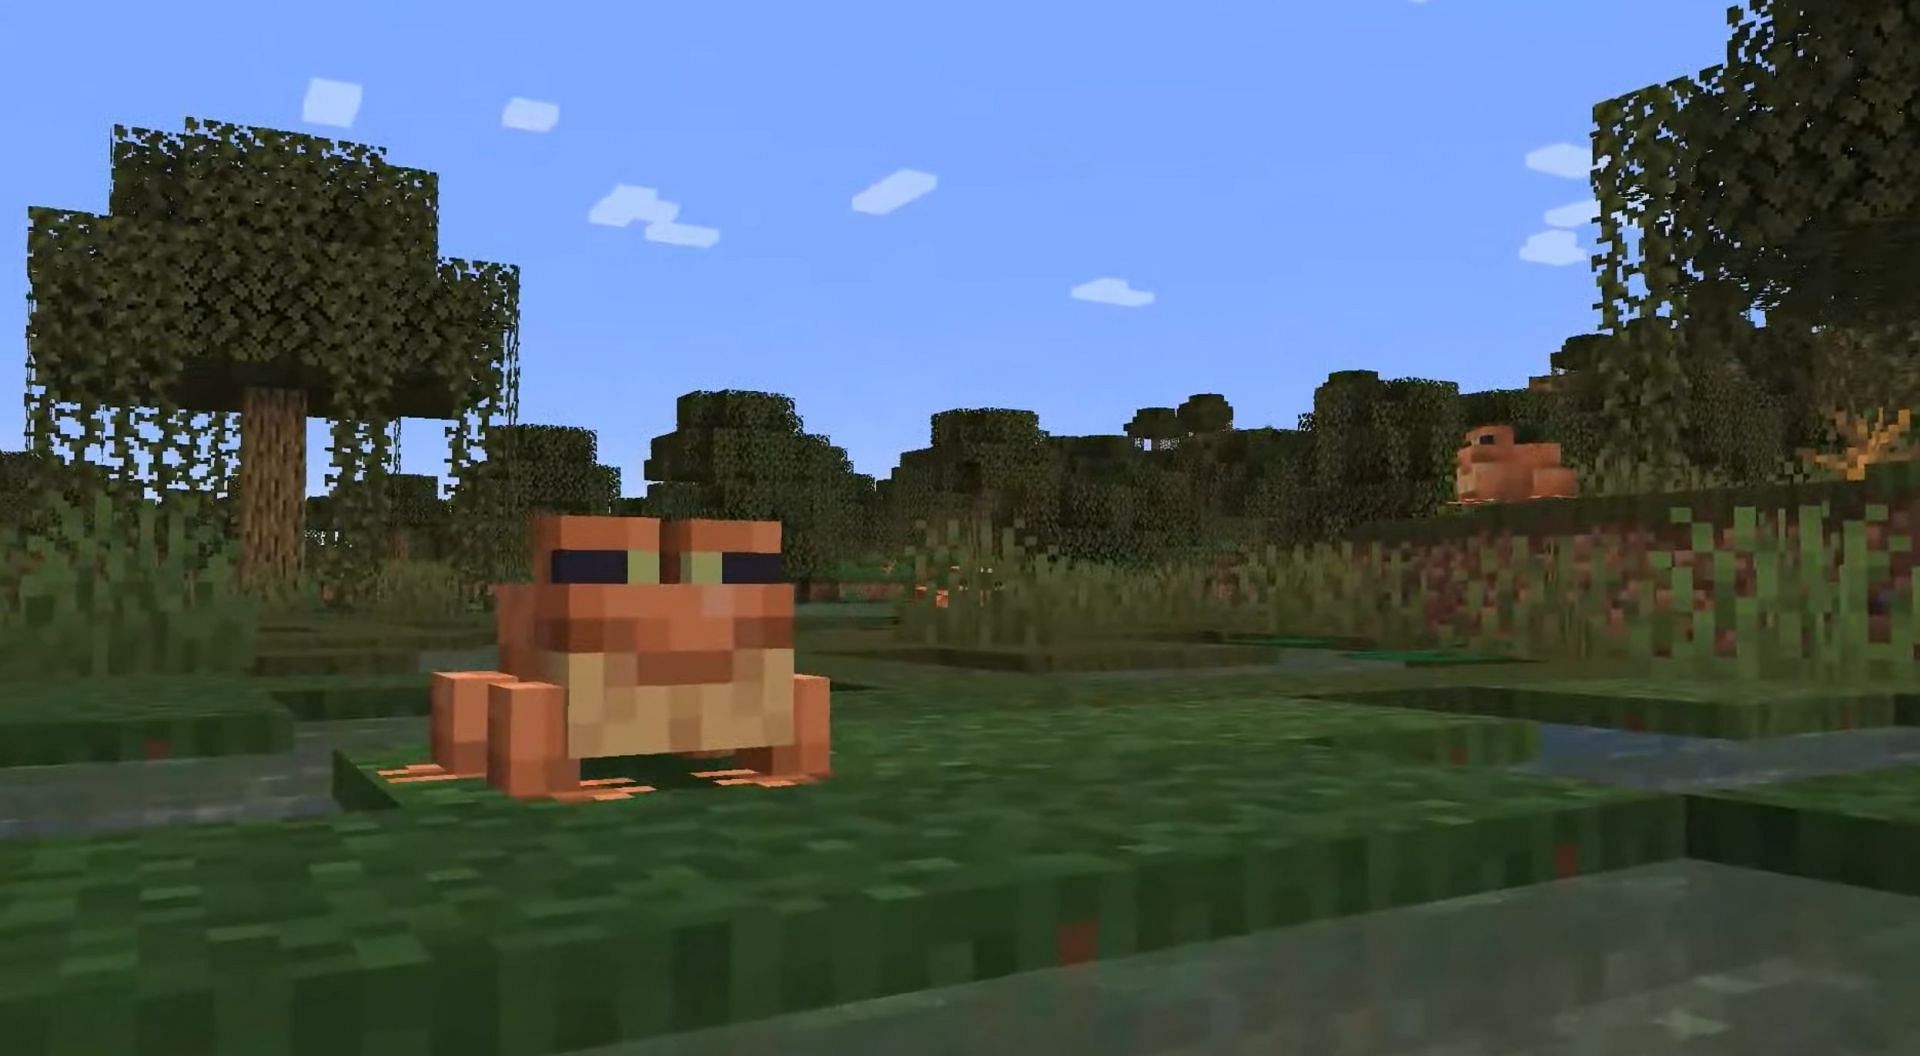 What we know about frogs in Minecraft so far